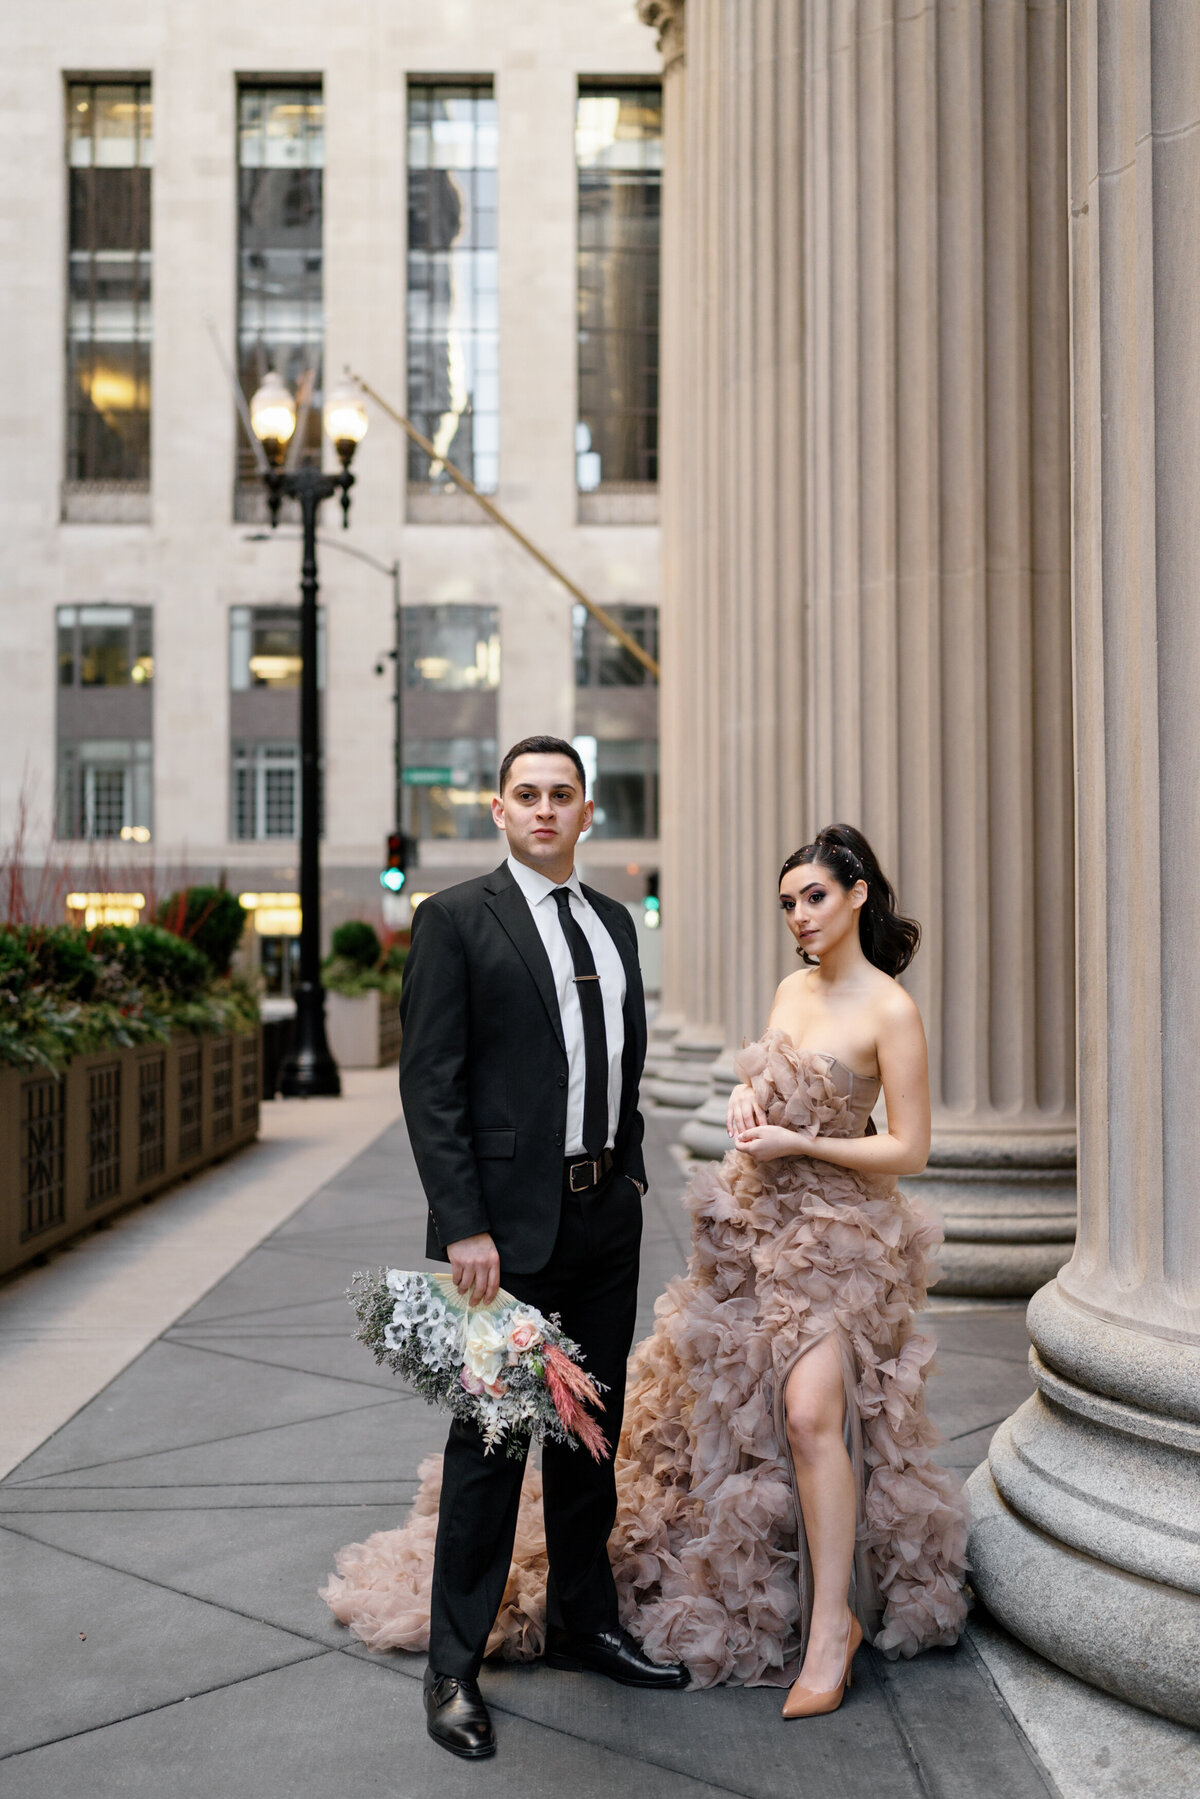 Aspen-Avenue-Chicago-Wedding-Photographer-Rookery-Engagement-Session-Histoircal-Stairs-Moody-Dramatic-Magazine-Unique-Gown-Stemming-From-Love-Emily-Rae-Bridal-Hair-FAV-77